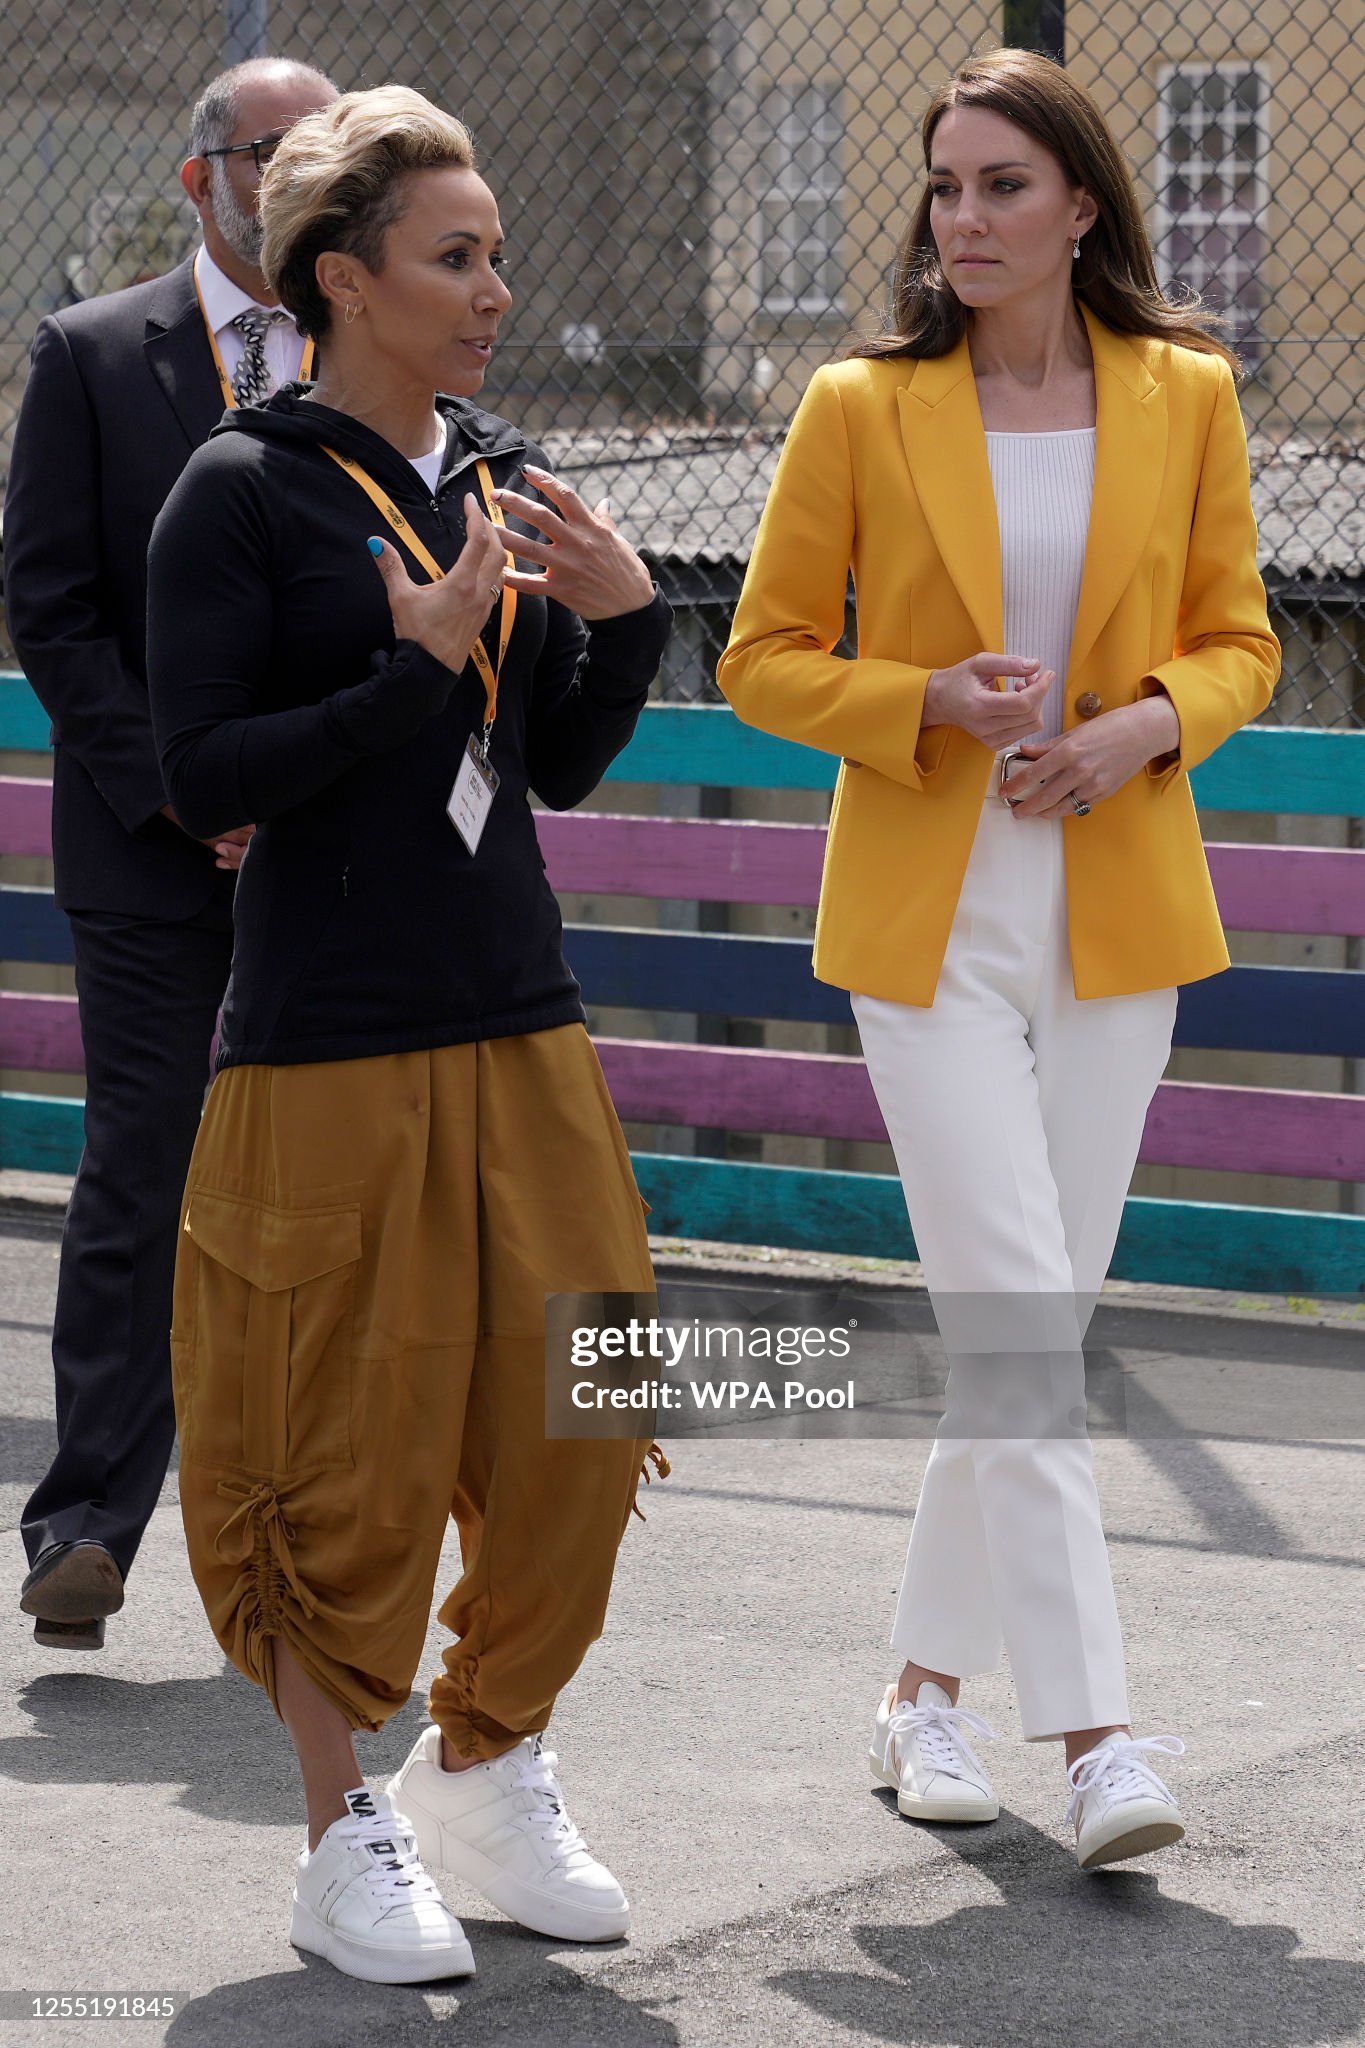 catherine-princess-of-wales-speaks-to-dame-kelly-holmes-as-she-visits-the-dame-kelly-holmes.jpg